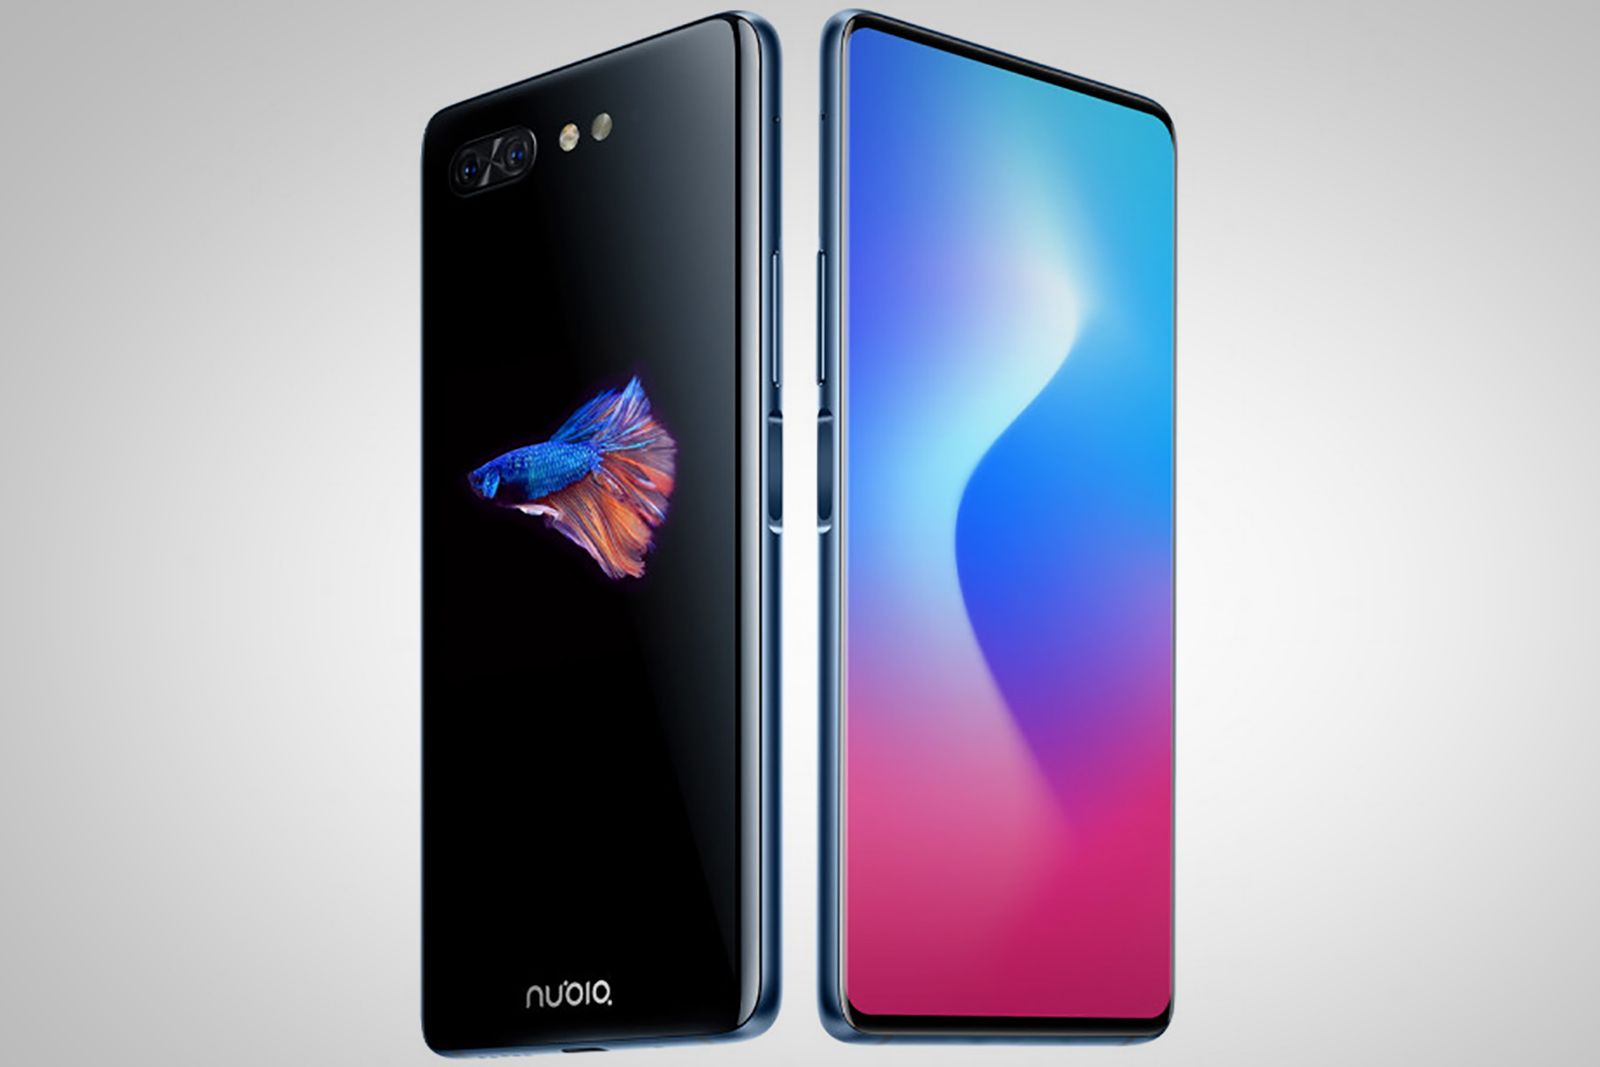 The Nubia X has an OLED screen on the back that completely disappears image 1